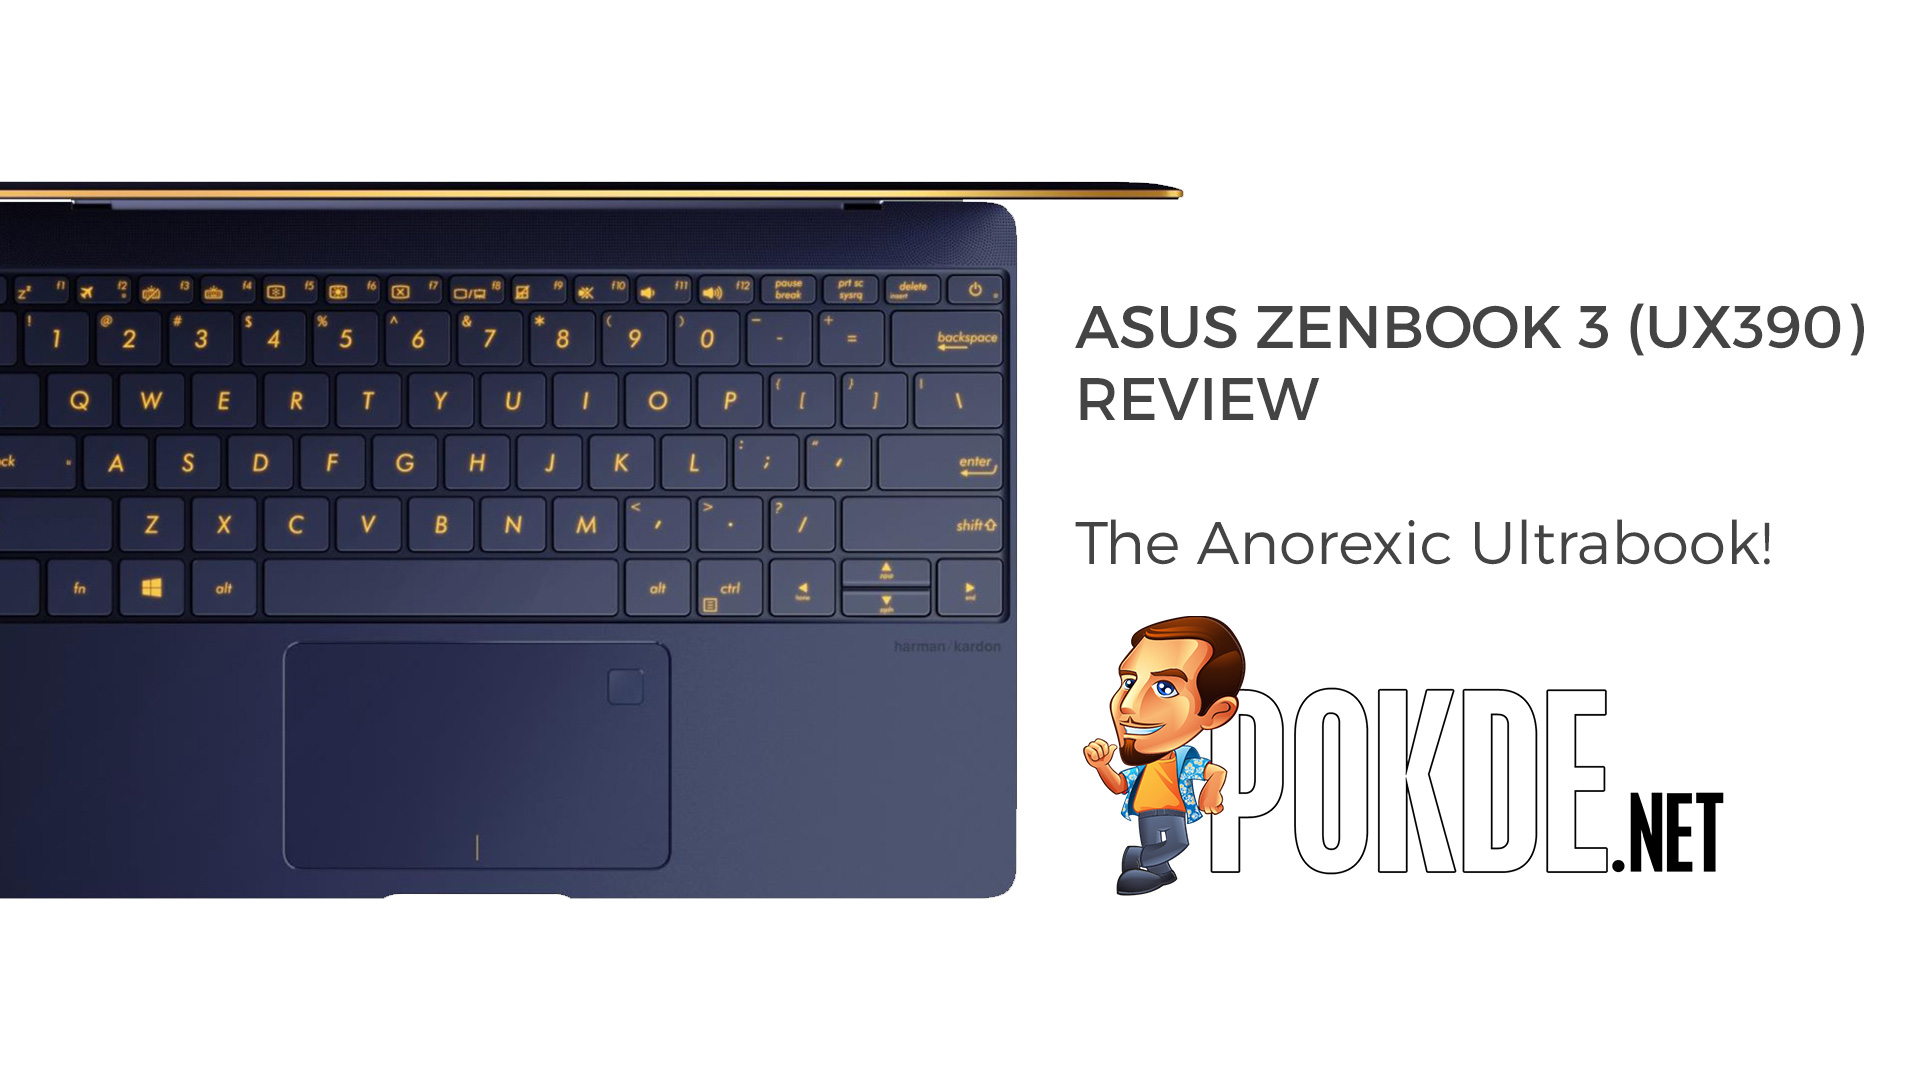 Asus ZenBook 3 (UX390) Review - The Anorexic Ultrabook 34